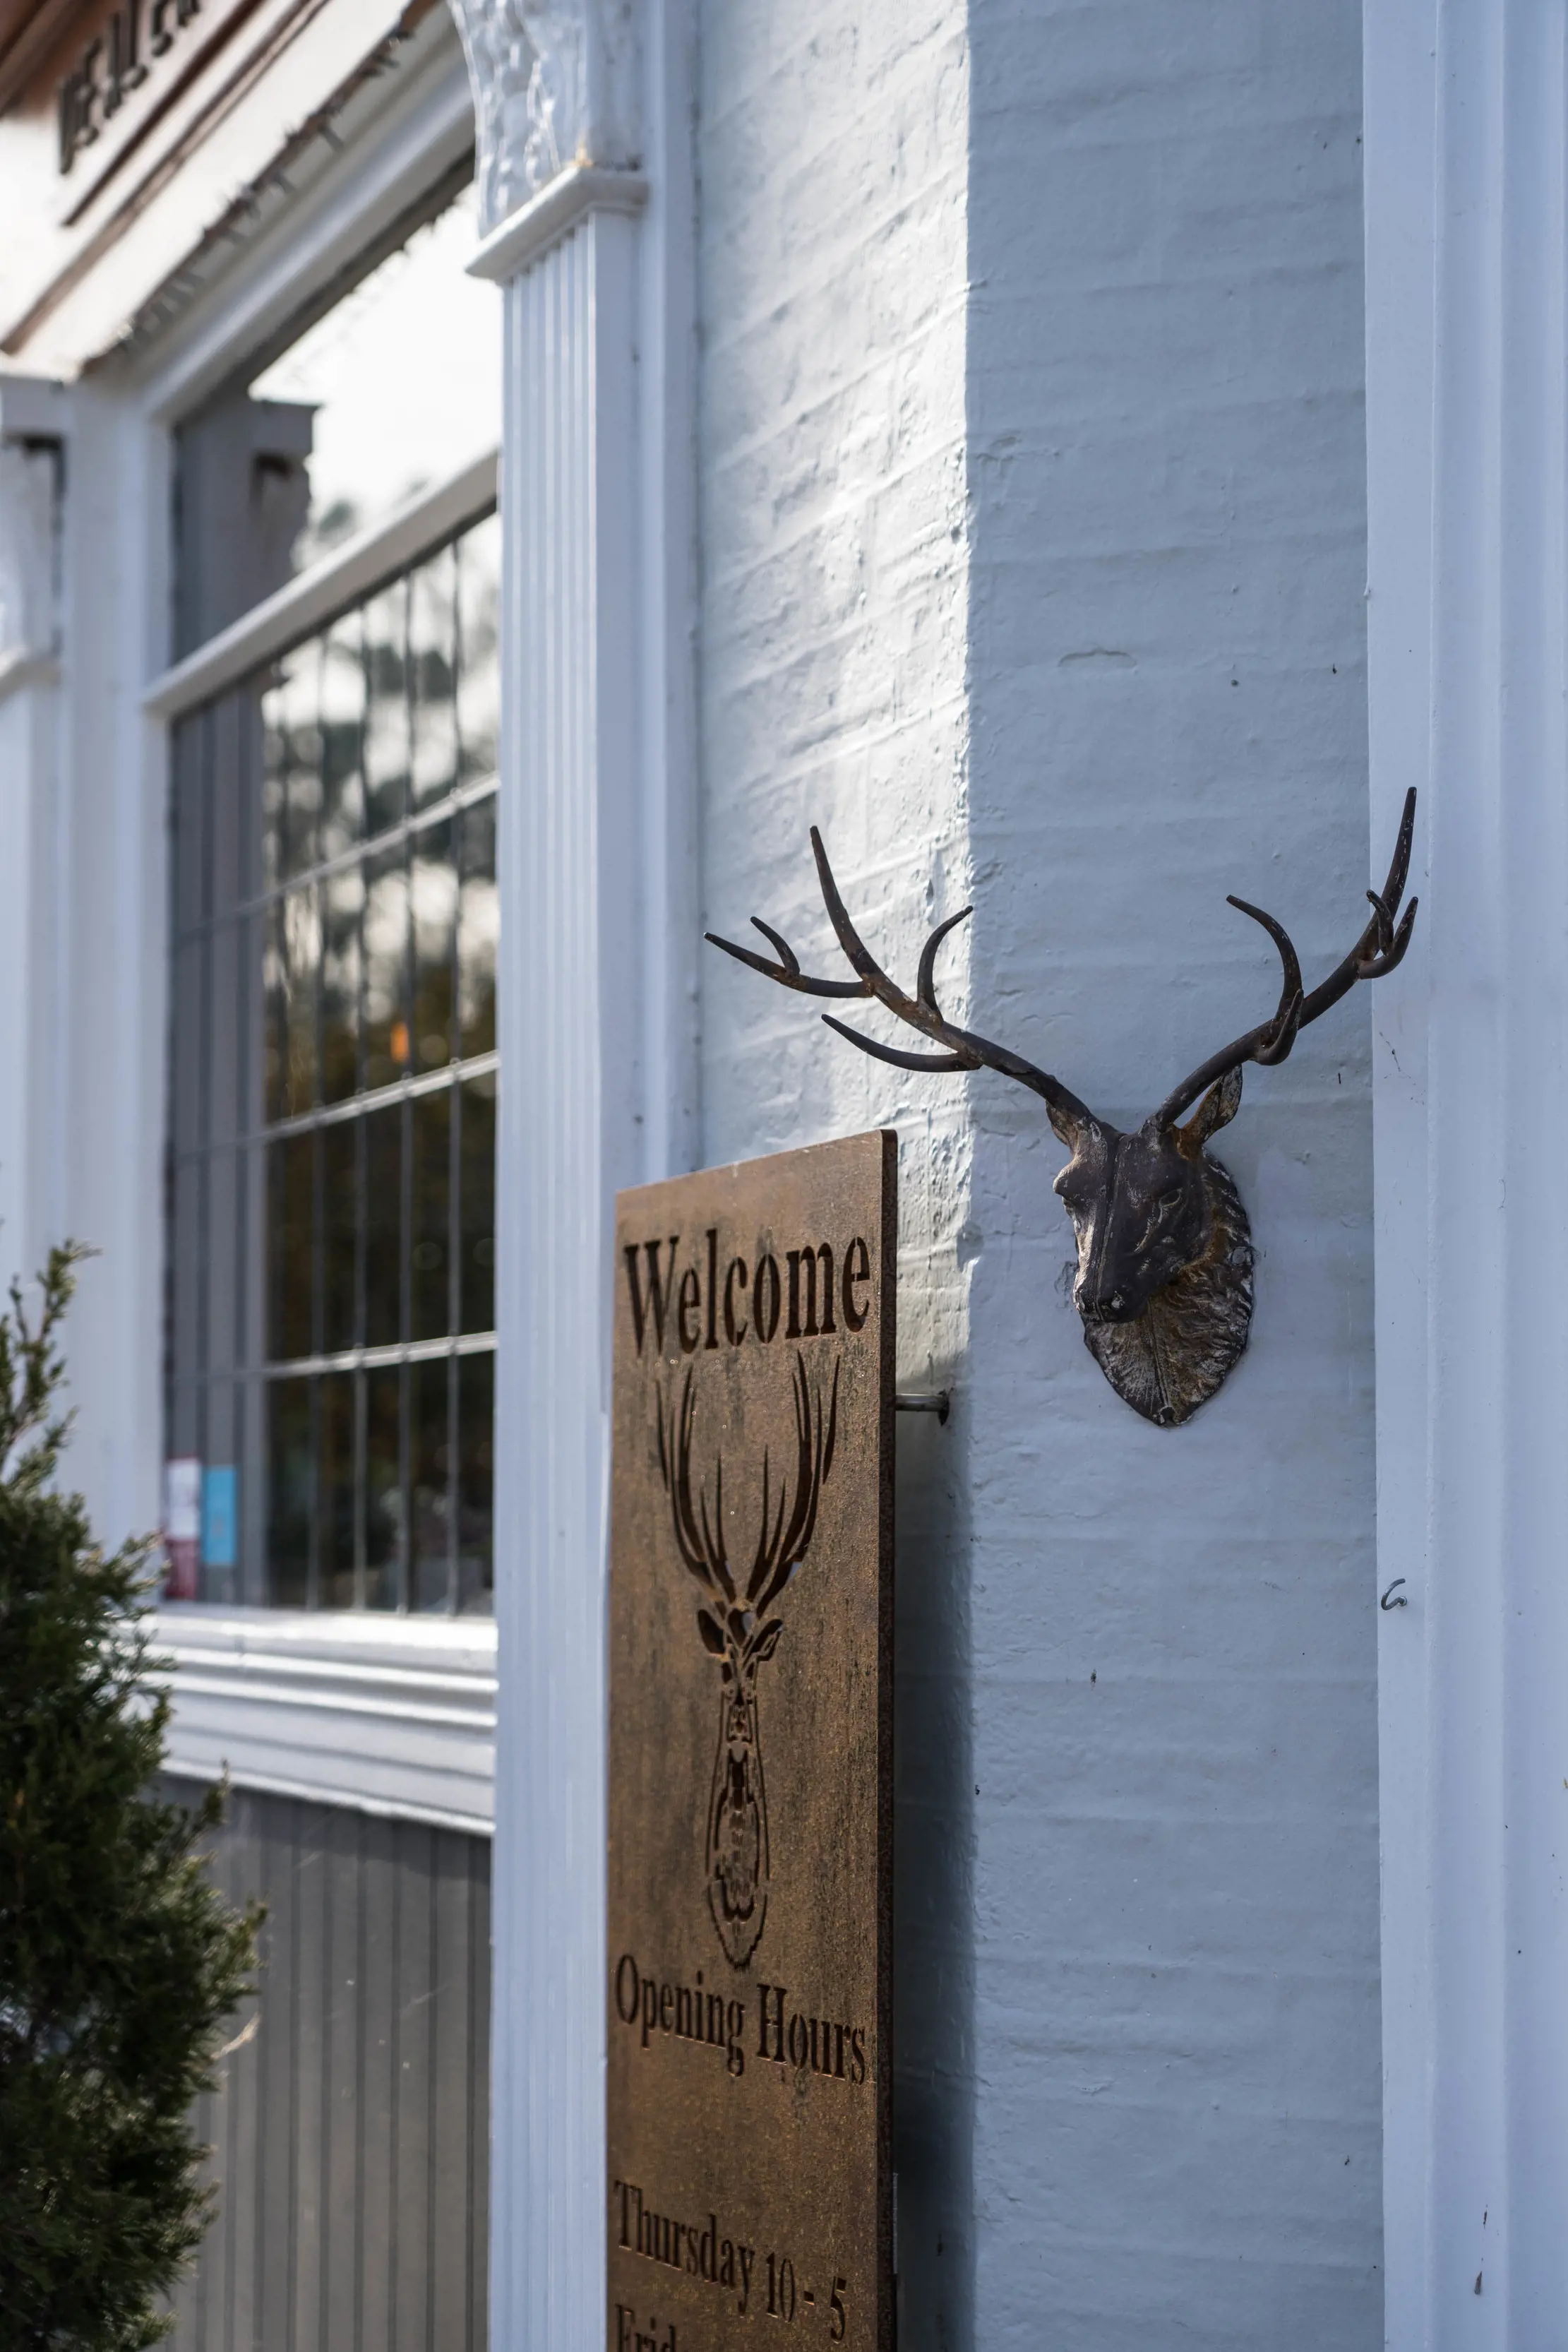 Image of a welcome and a man made deer head, placed out the front of the Clarendon Arms.